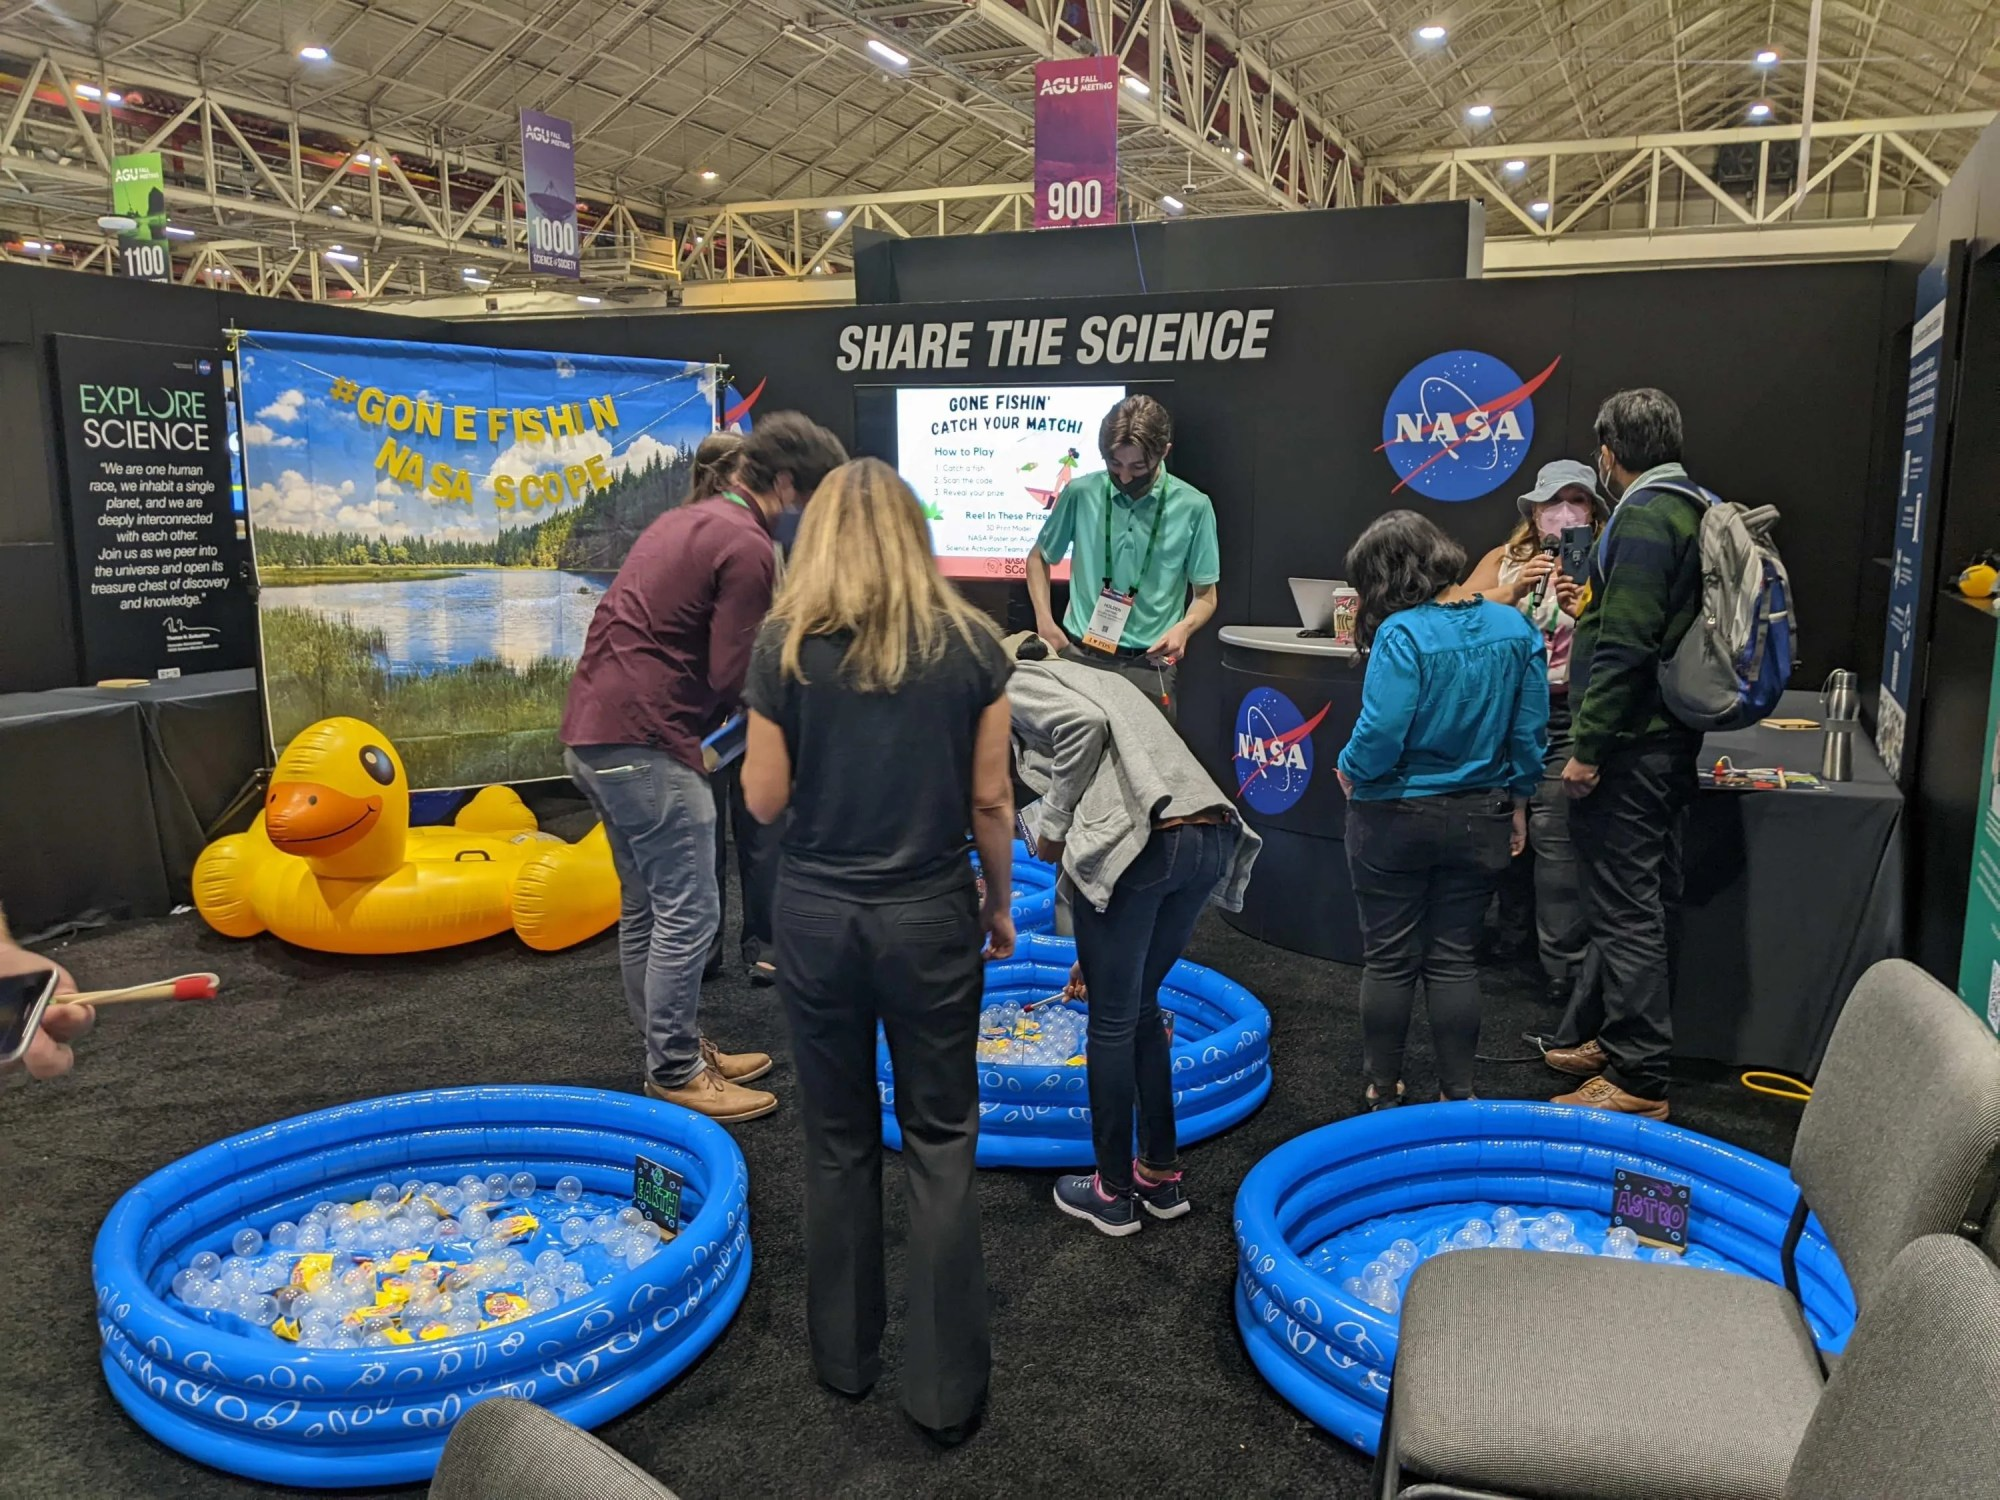 Learning area of the NASA booth showing inflatable swimming pools filled with fish, balls, etc. In the background is a backdrop of a lake with the title of Gone Fishin' NASA SCoPE and a large inflatable duck in front of it. Around the area, people are using fishing poles to catch fish, scan QR codes, and gathering giveaways.